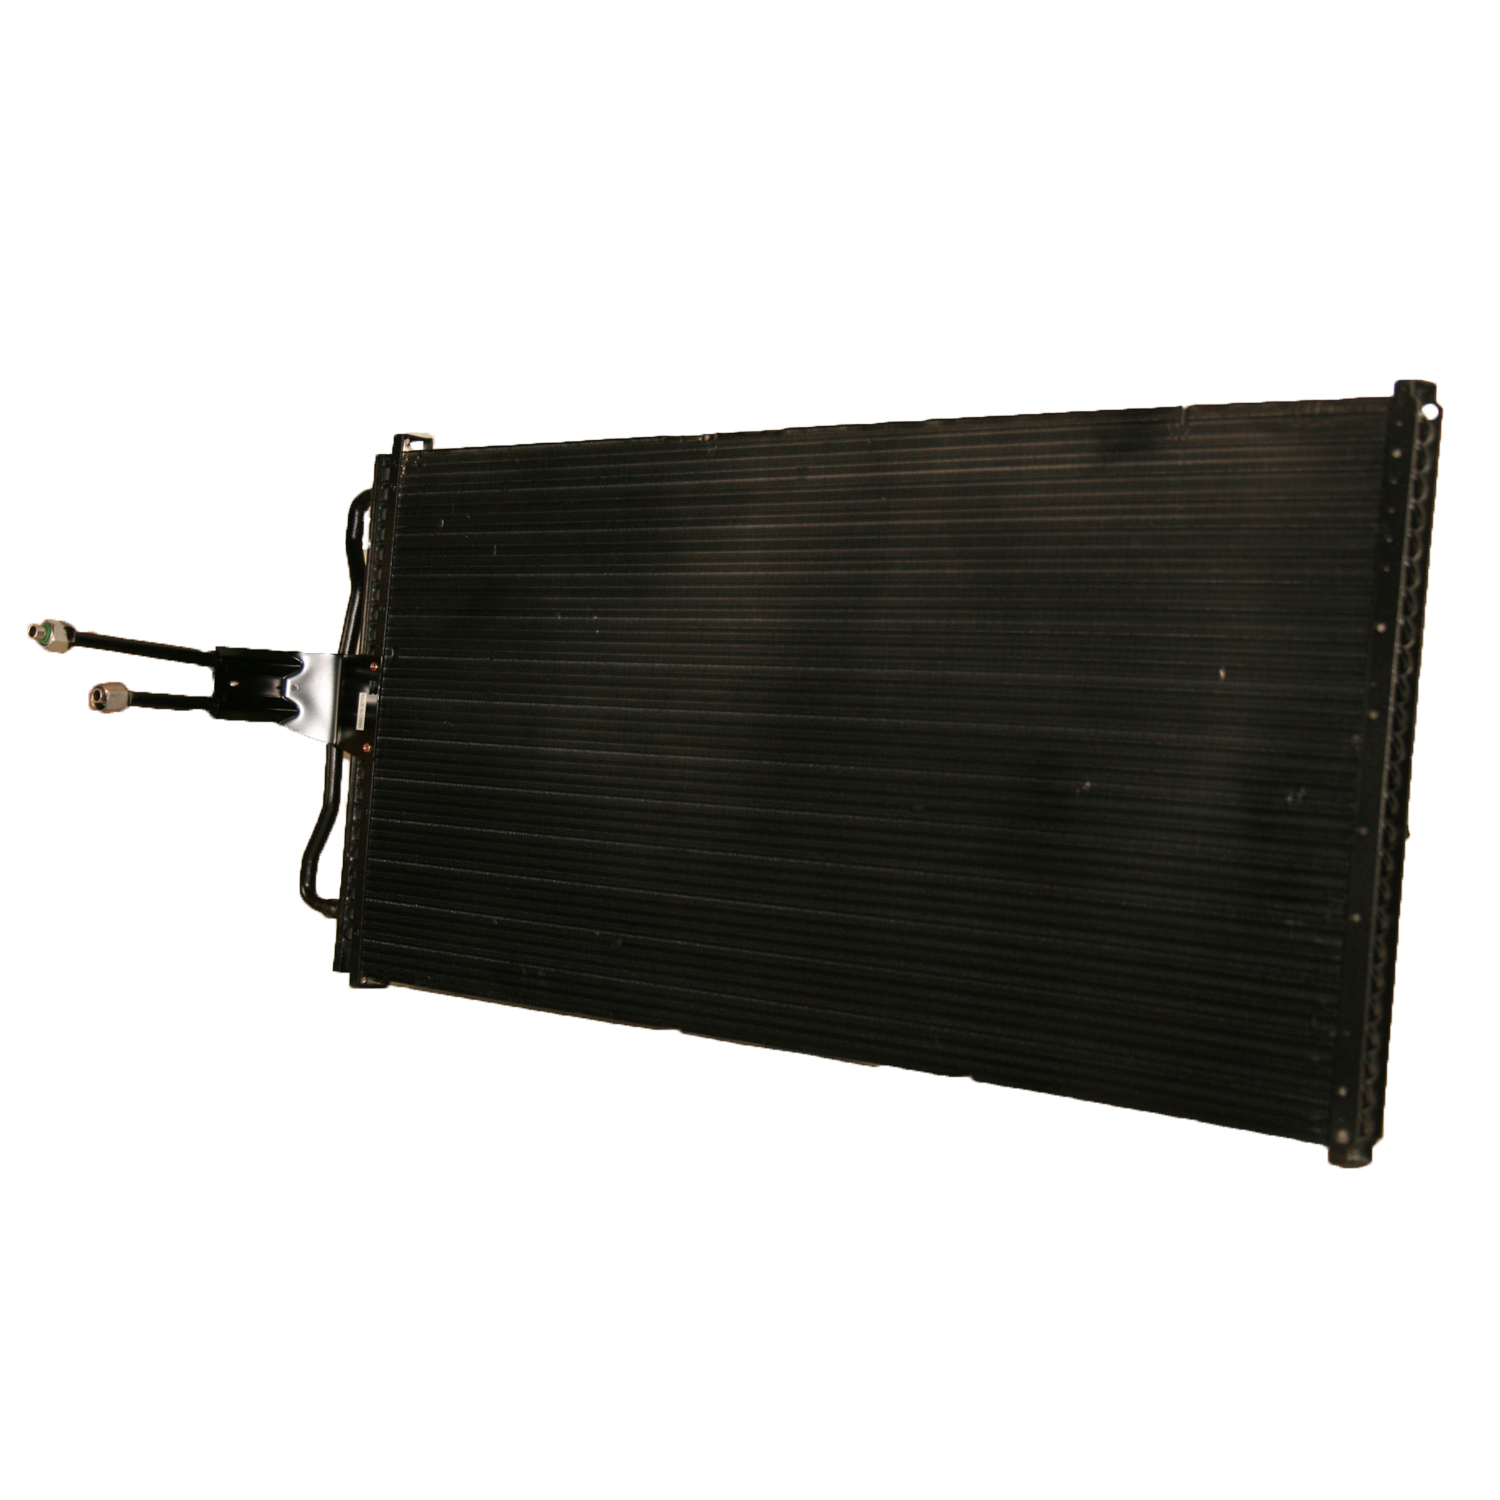 TCW Condenser 44-3092 New Product Image field_60b6a13a6e67c